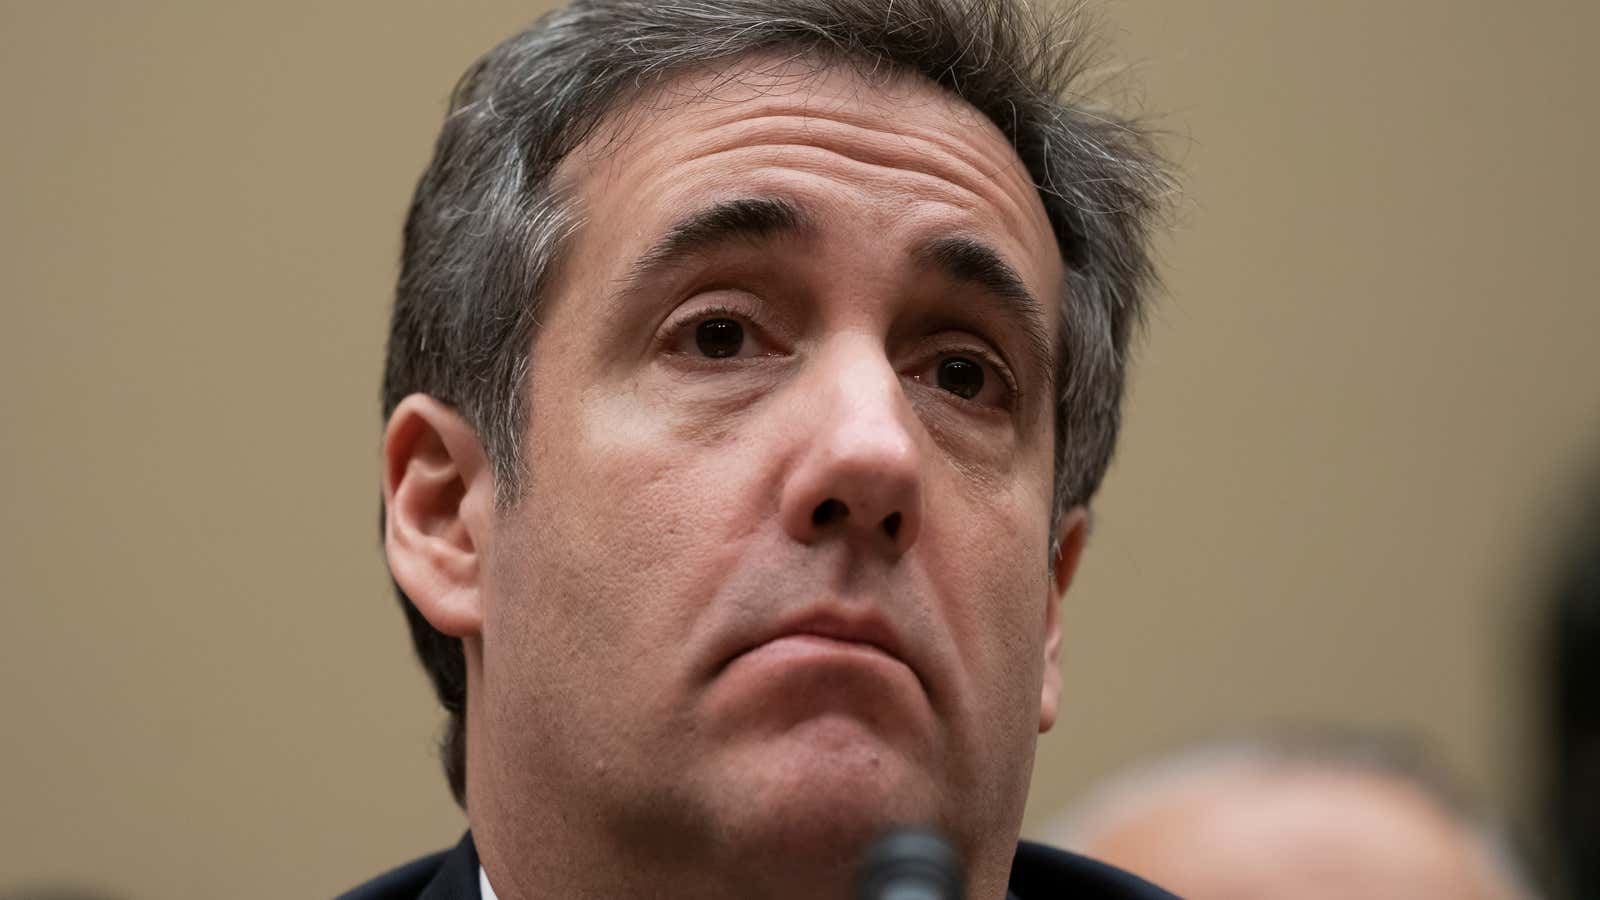 Michael Cohen called president Trump “a liar,” among other things.